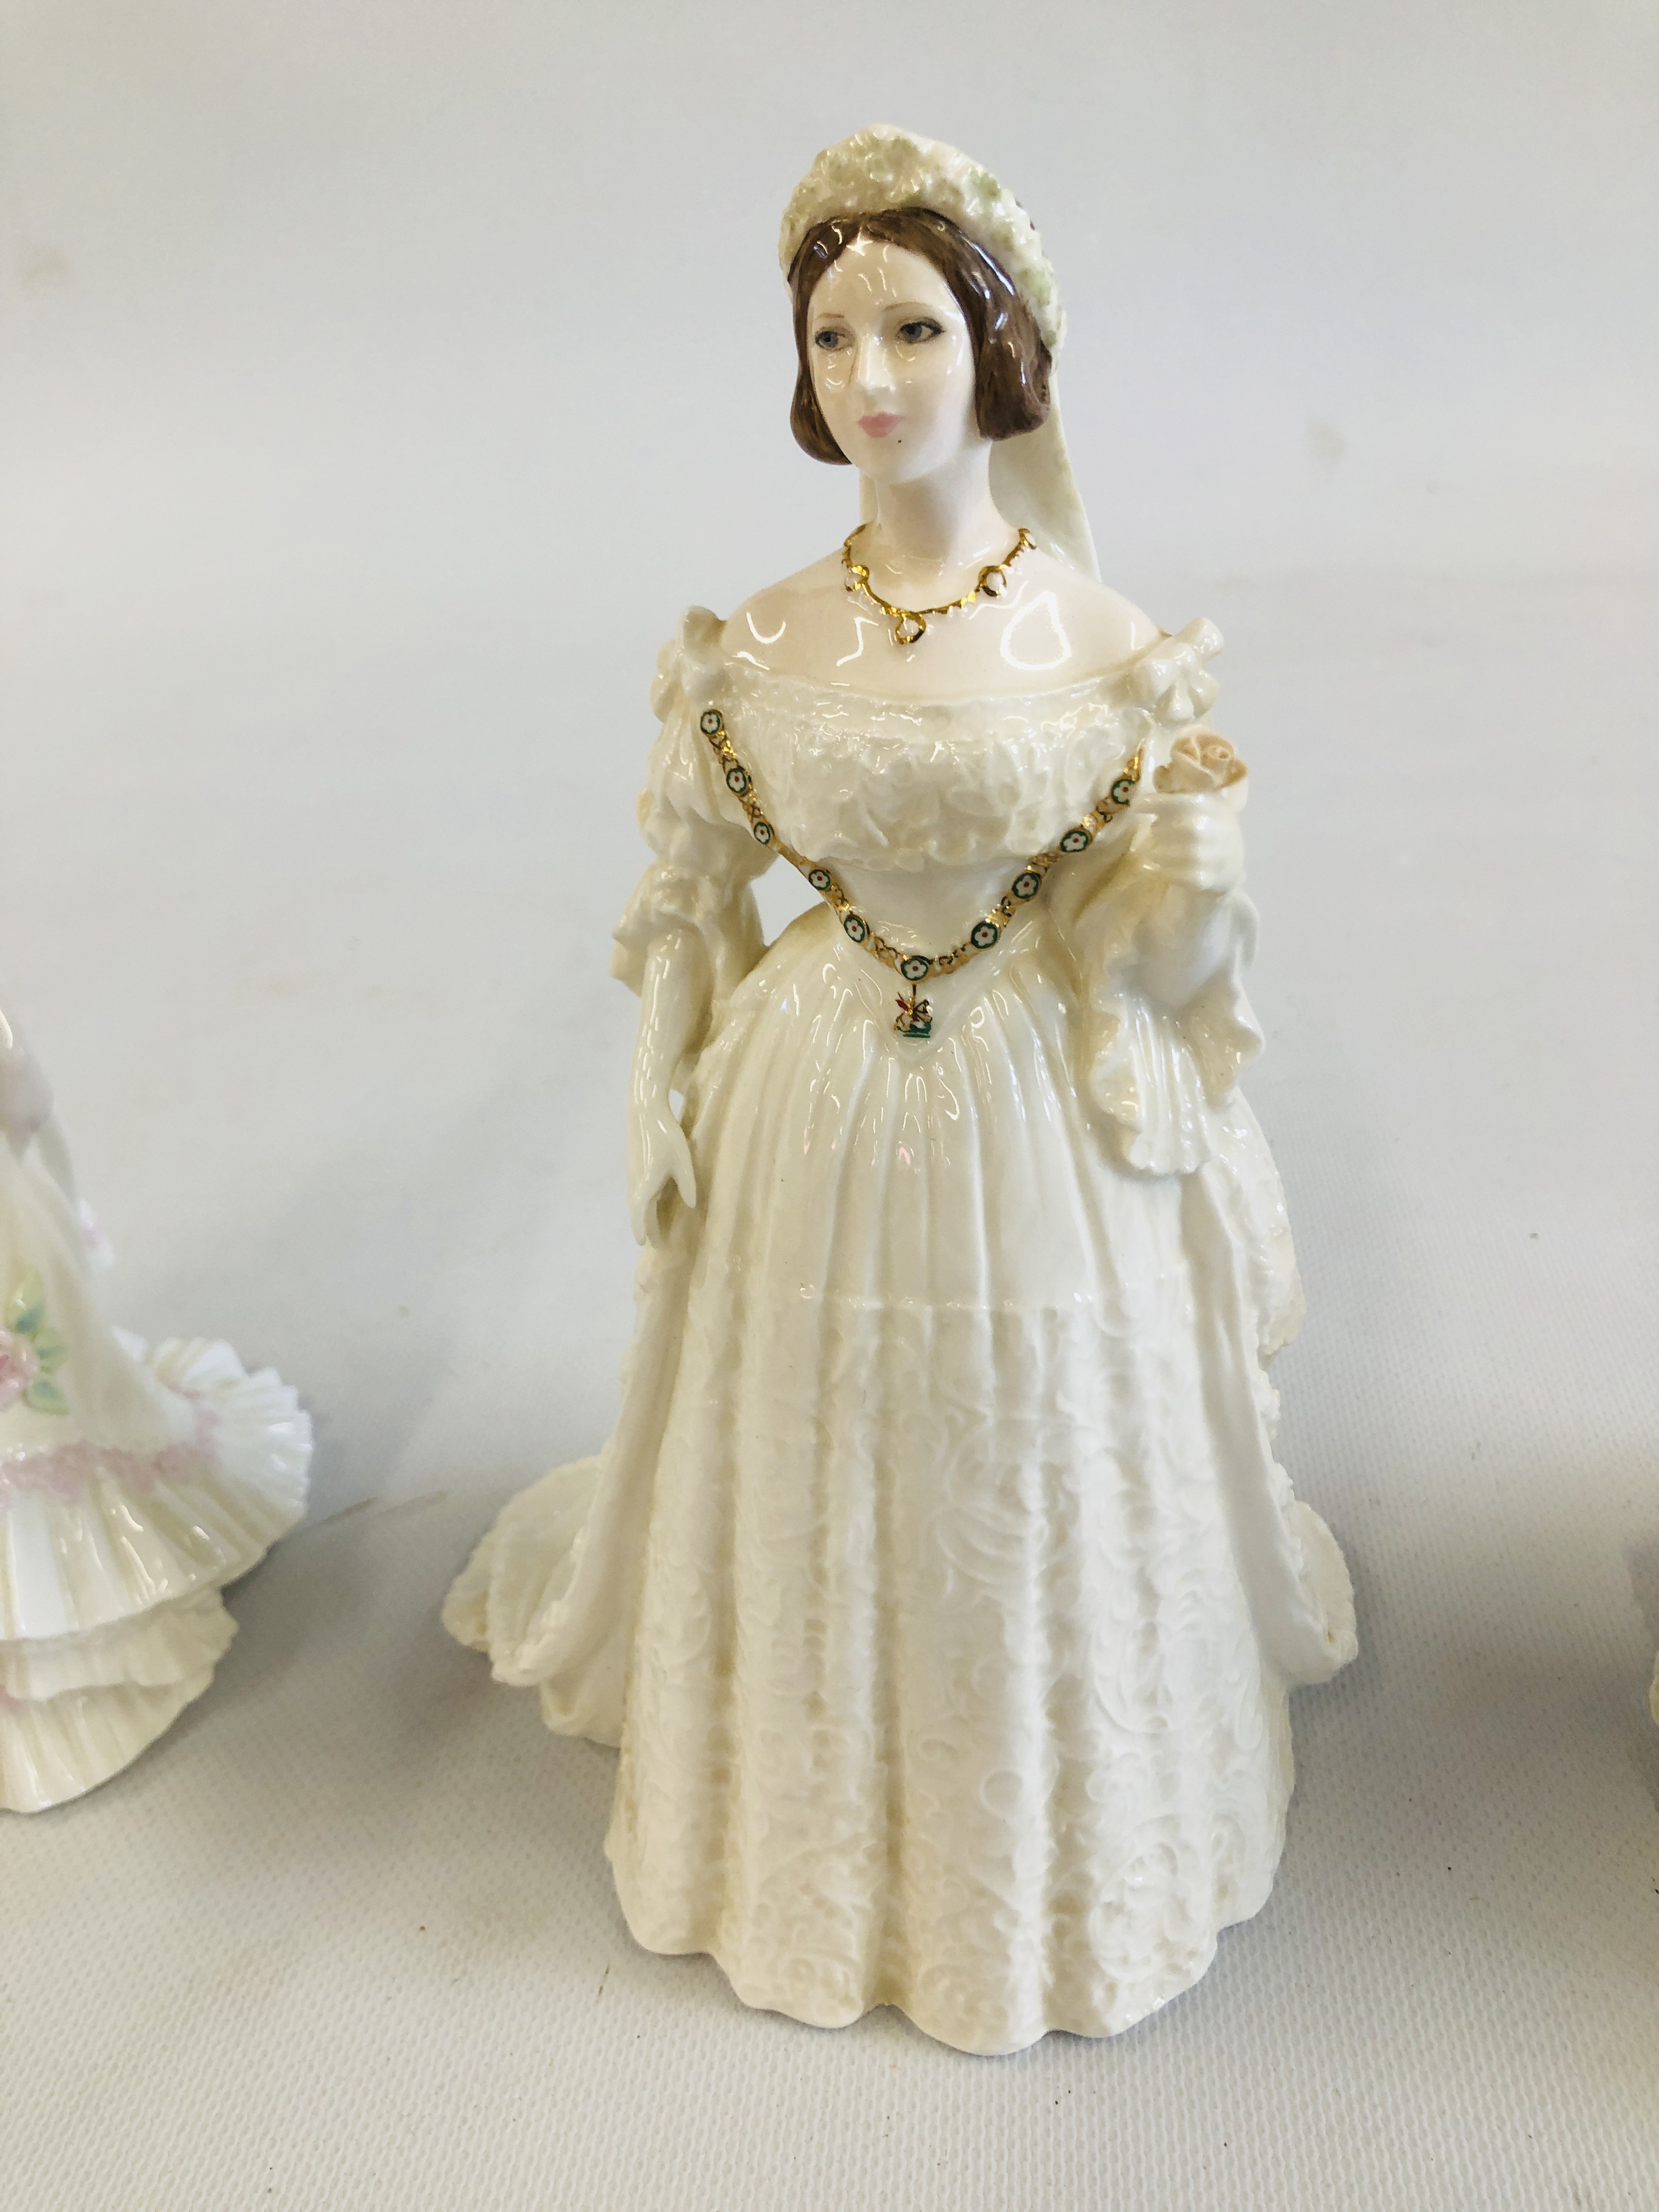 THREE COALPORT CHINA LIMITED EDITION CABINET FIGURES TO INCLUDE FEMMES FATALES "LILLIE LANGTRY" - Image 6 of 14